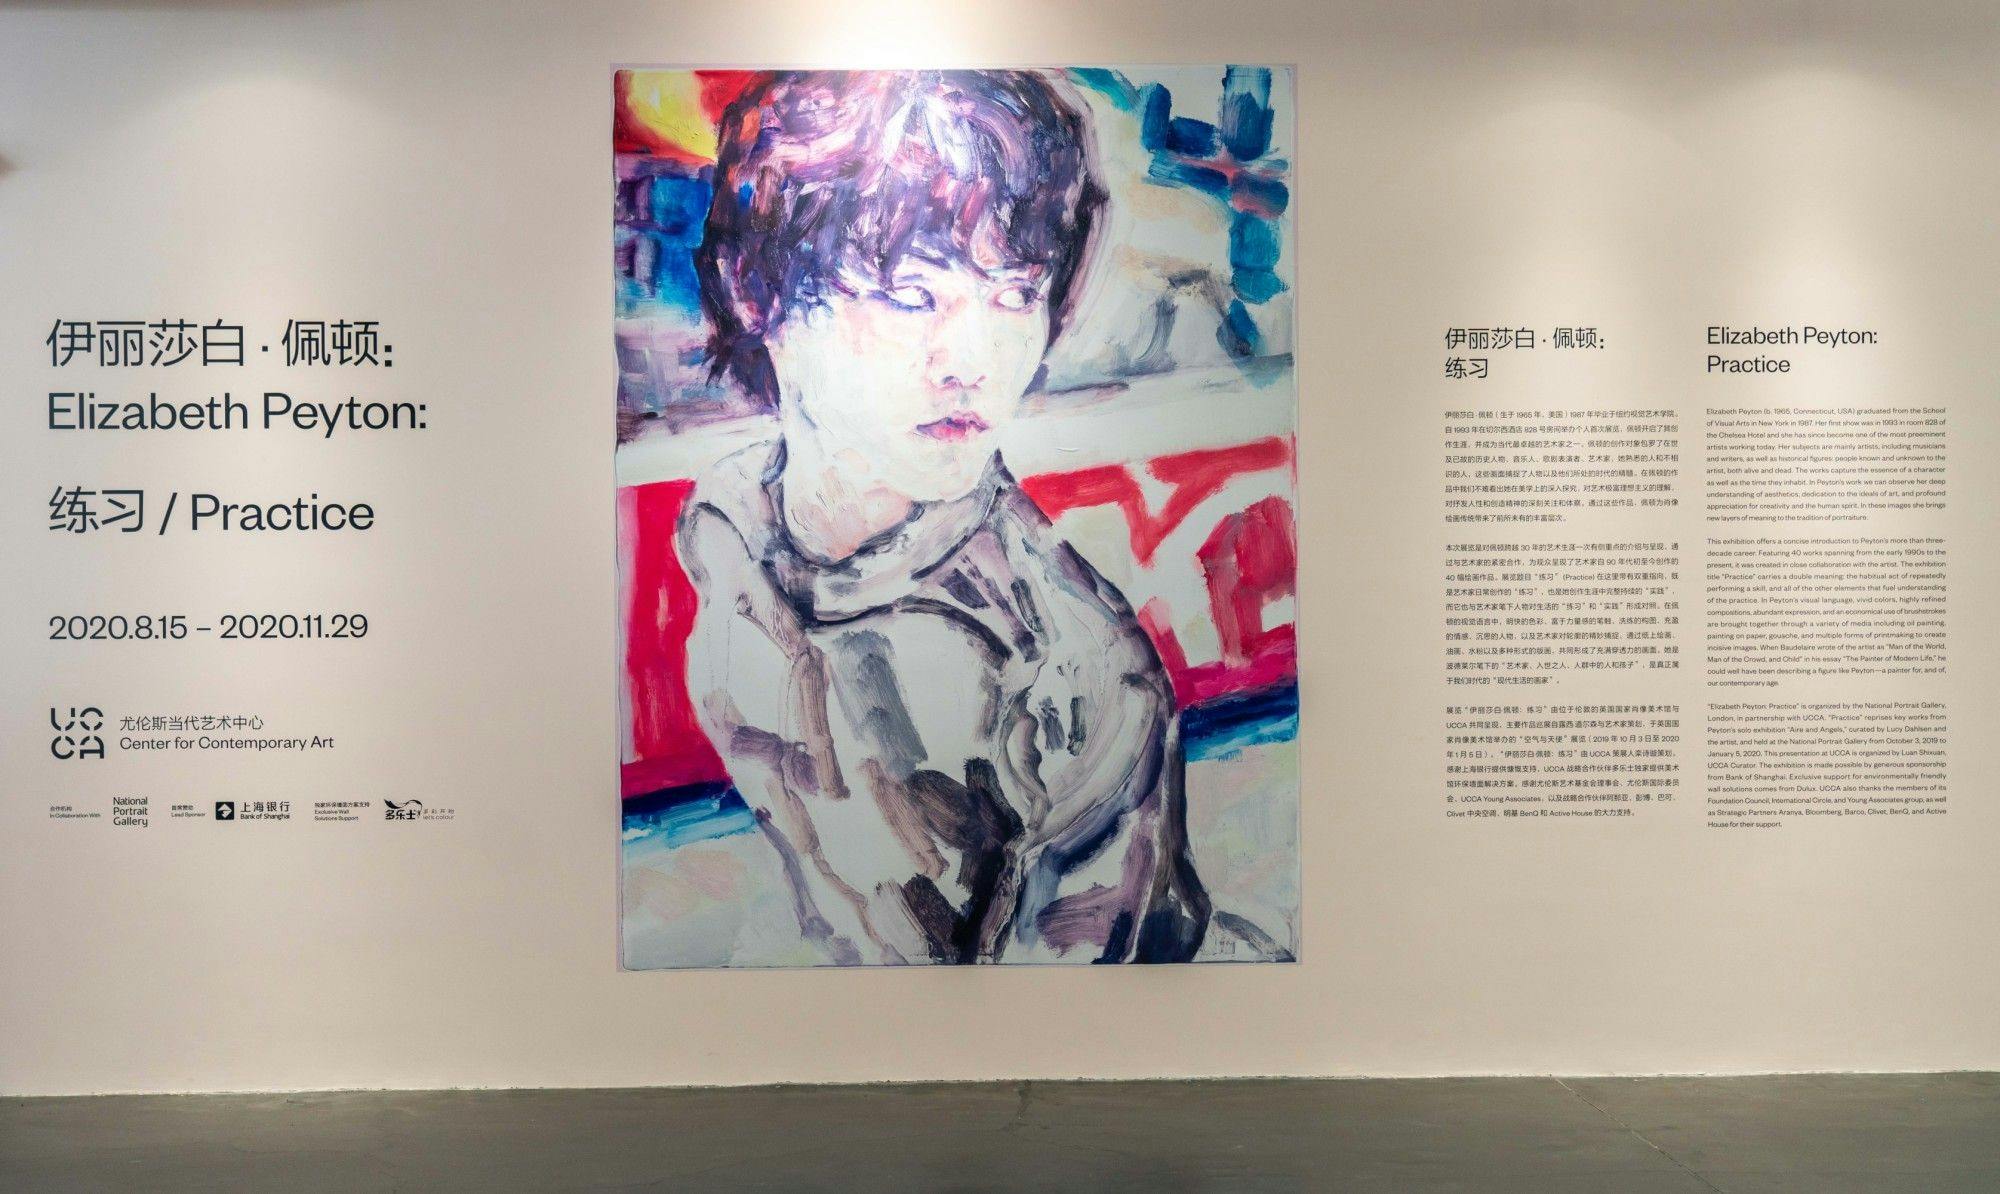 Installation view of an exhibition titled Elizabeth Peyton: Practice, at UCCA Beijing.